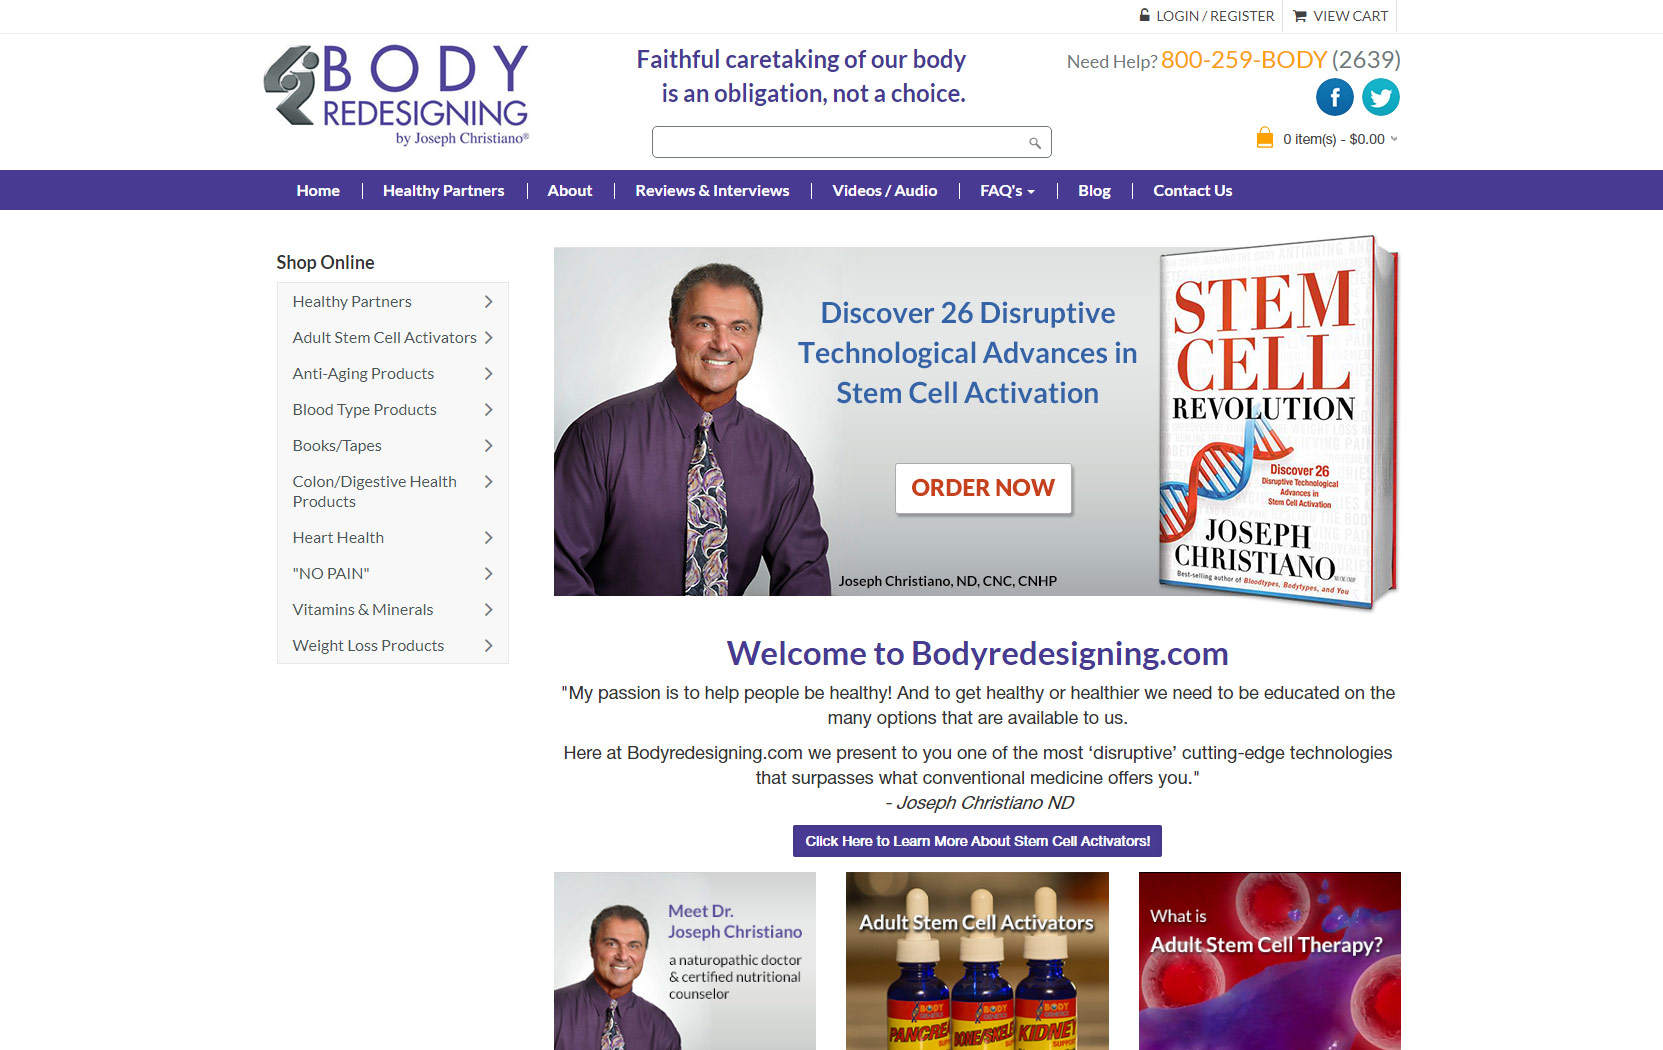 Body Redesigning by Joseph Christiano